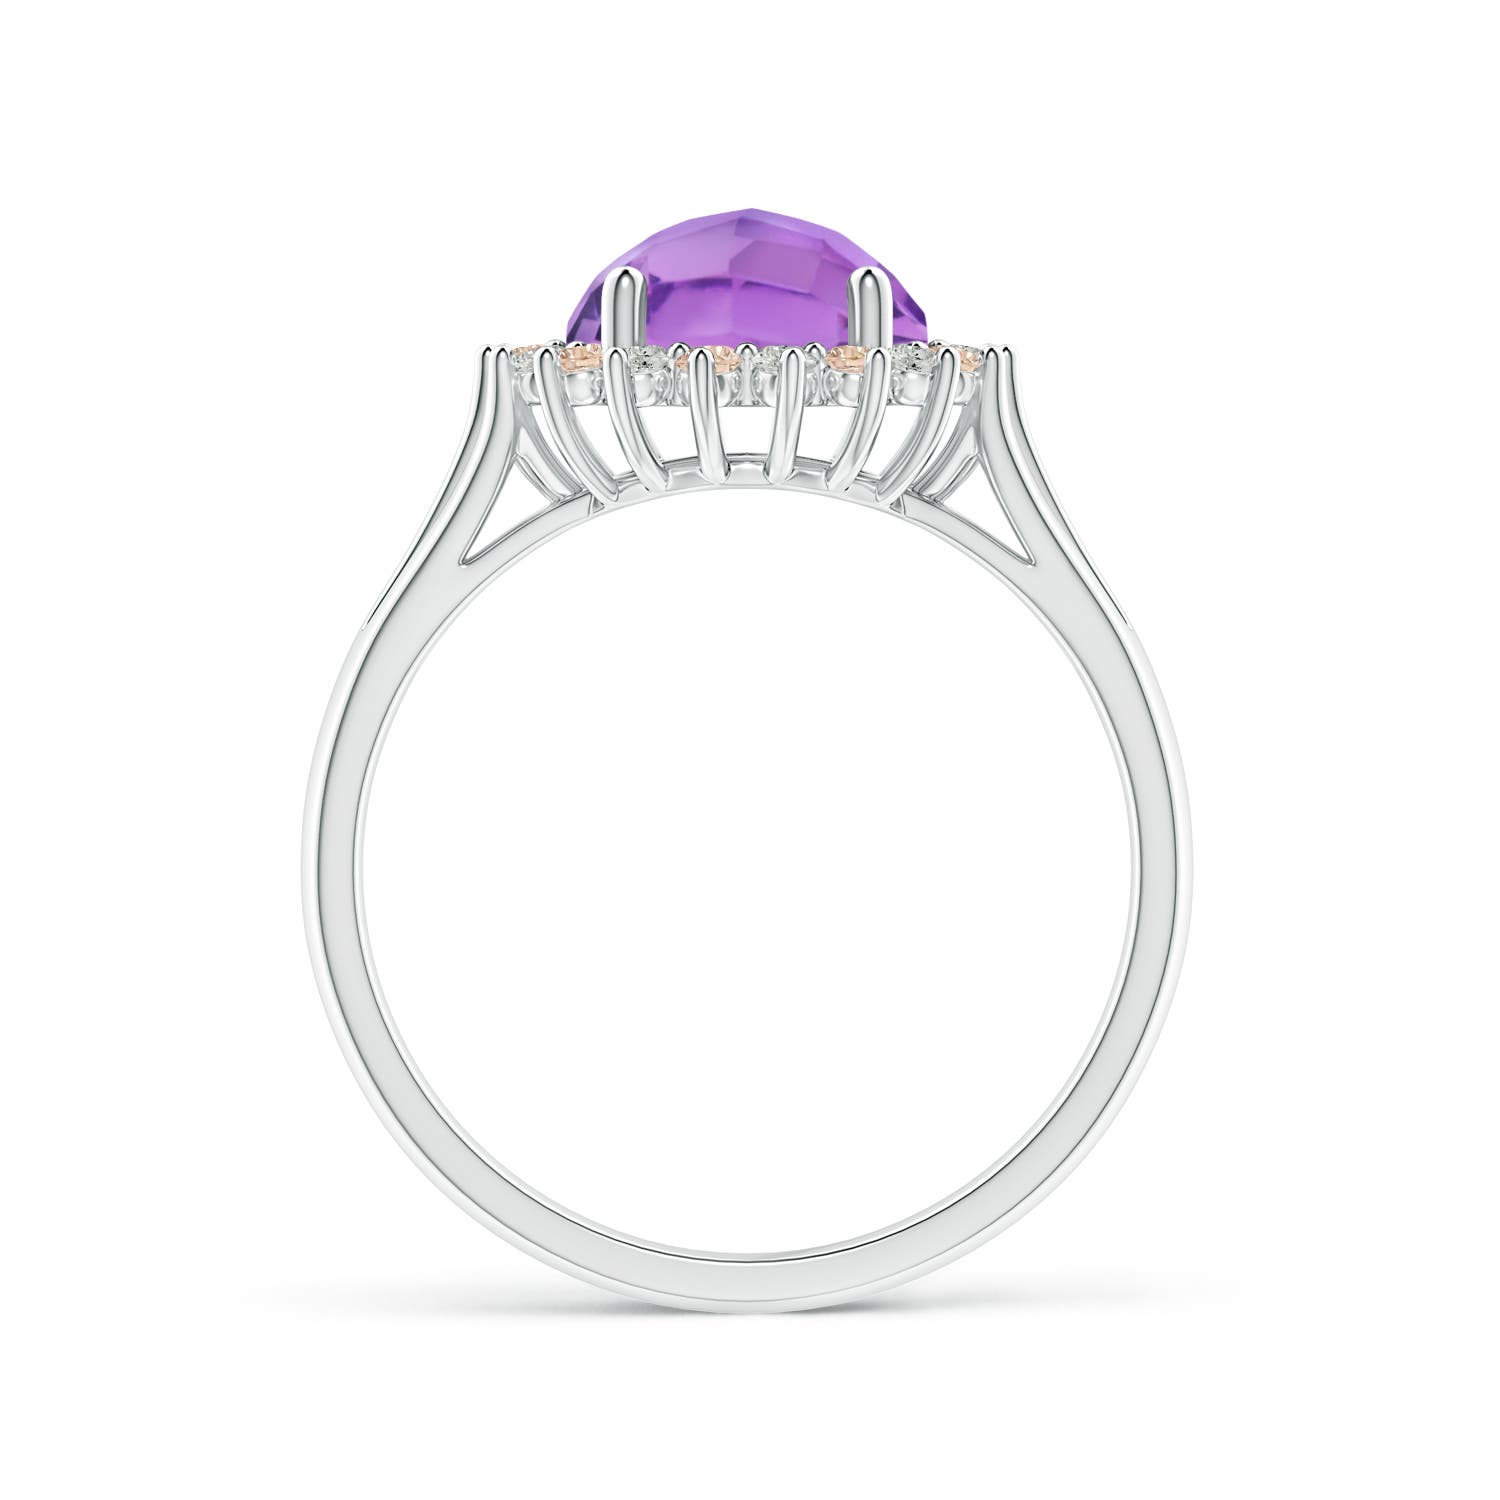 A - Amethyst / 2.1 CT / 14 KT White Gold